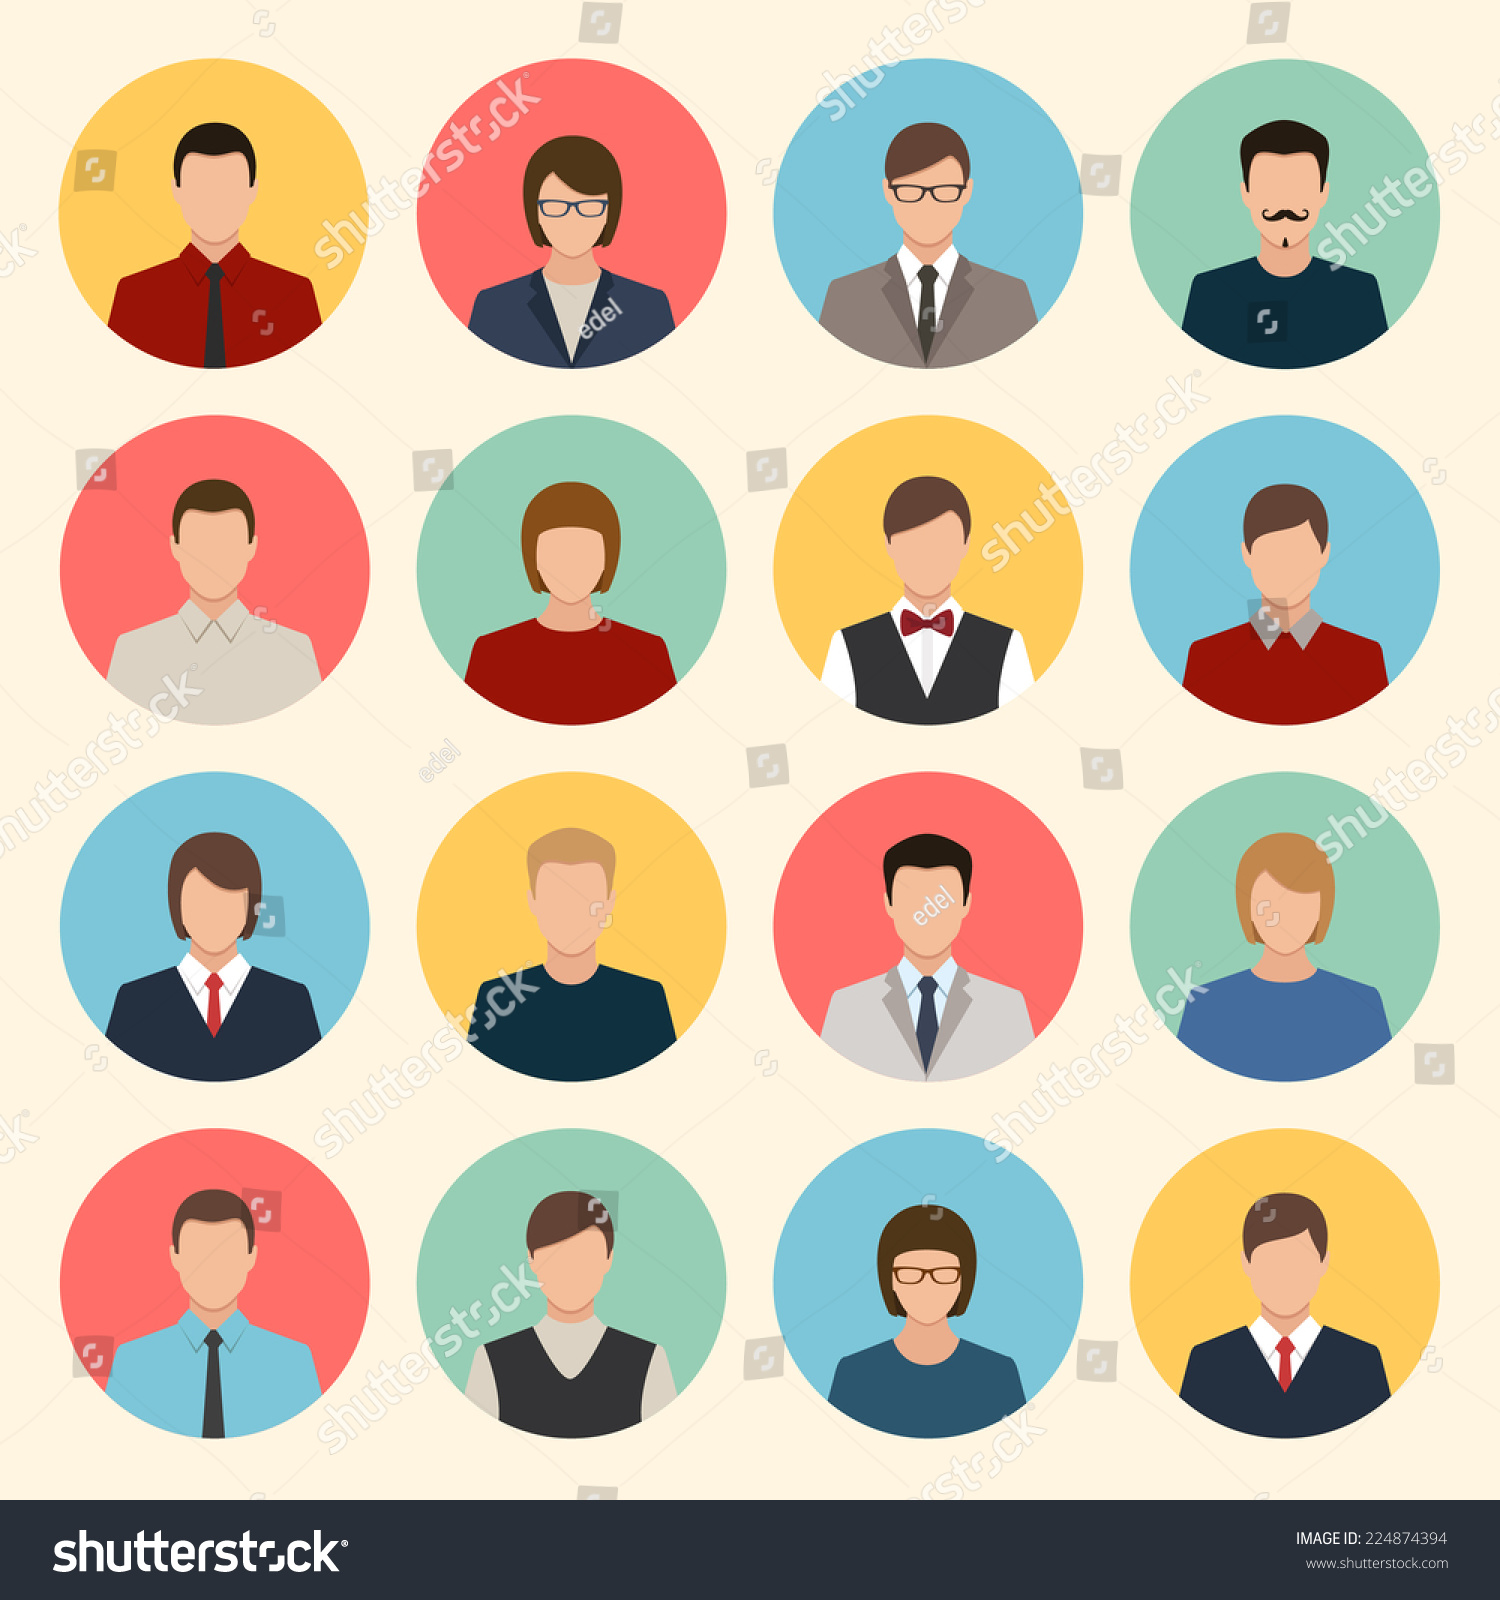 human clipart vector download free - photo #25